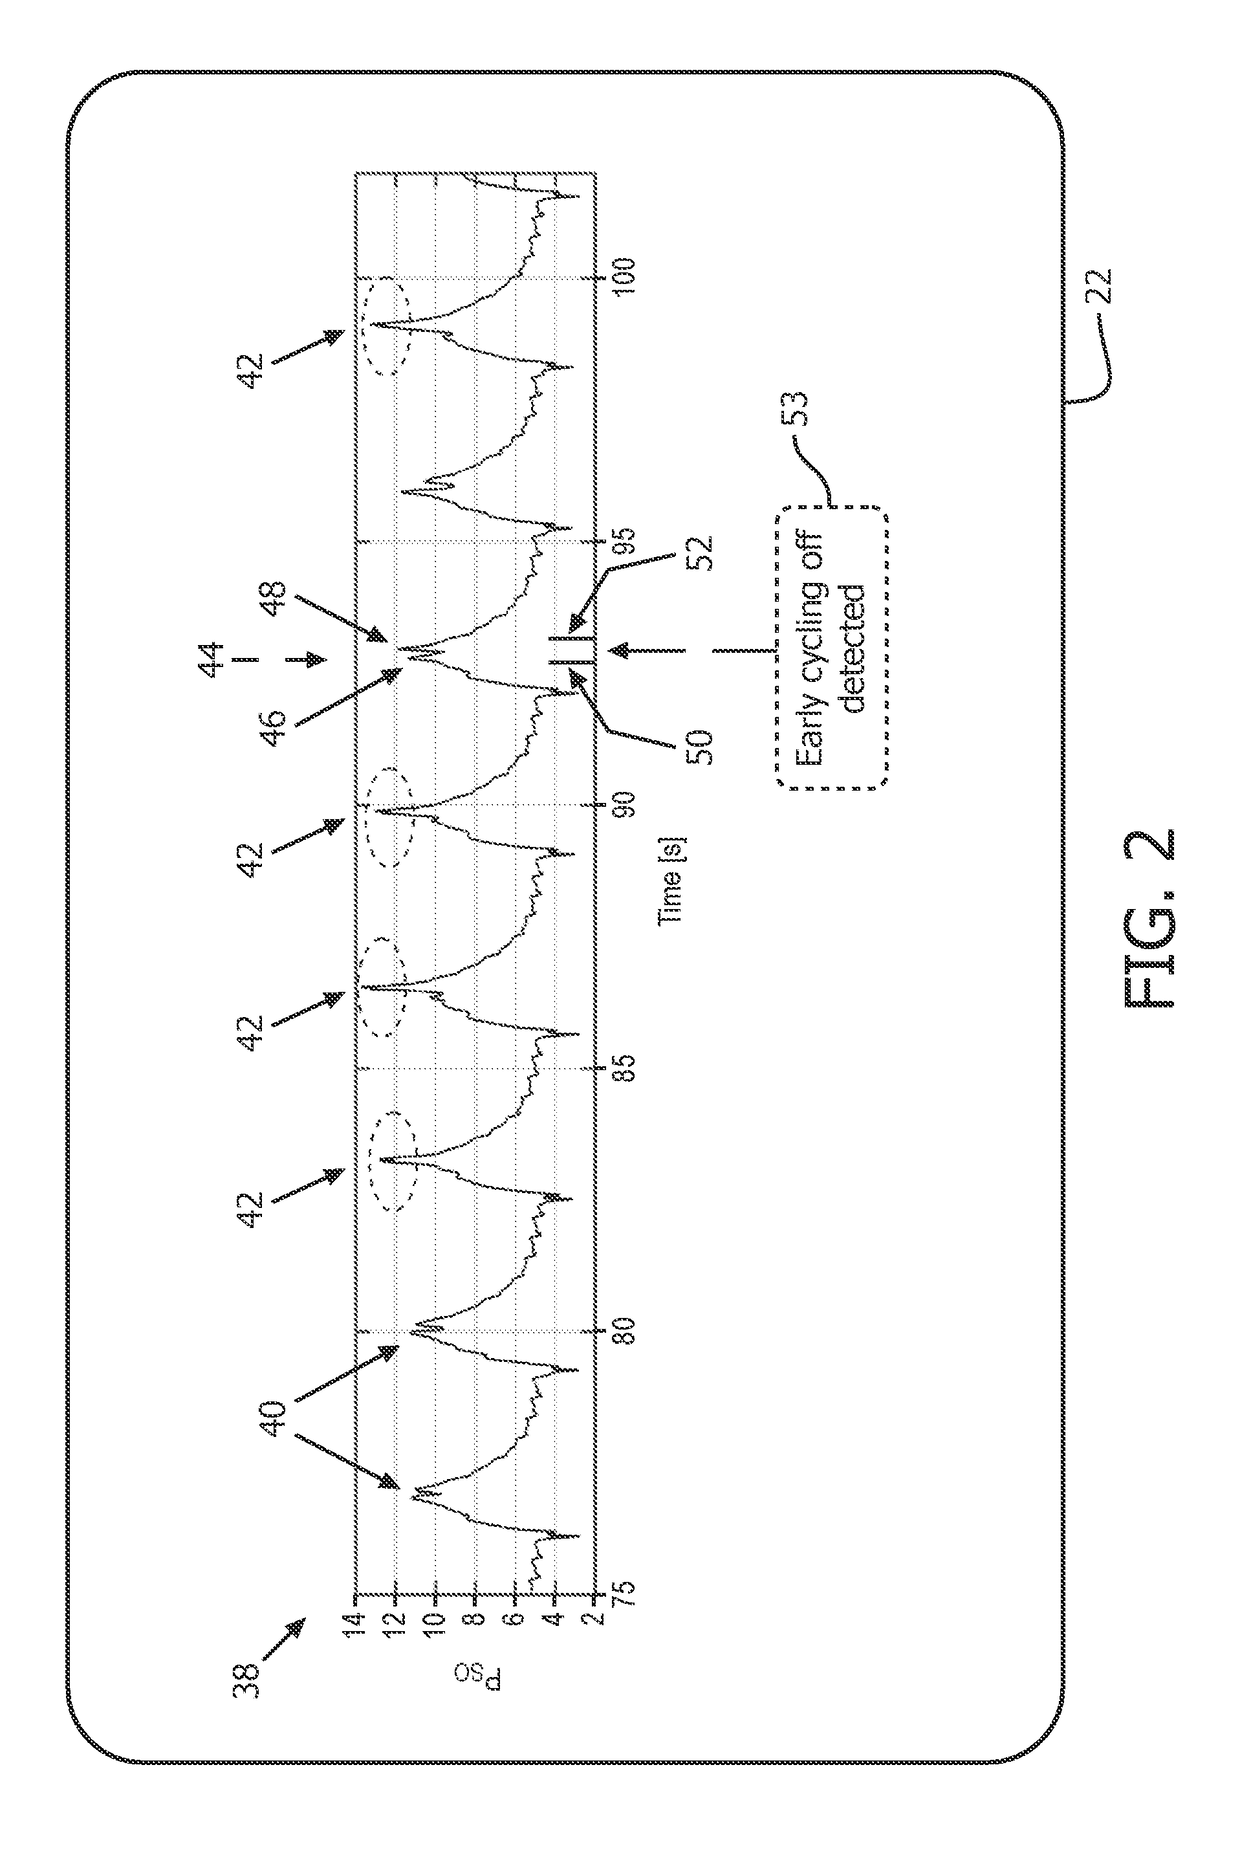 Anomaly detection device and method for respiratory mechanics parameter estimation